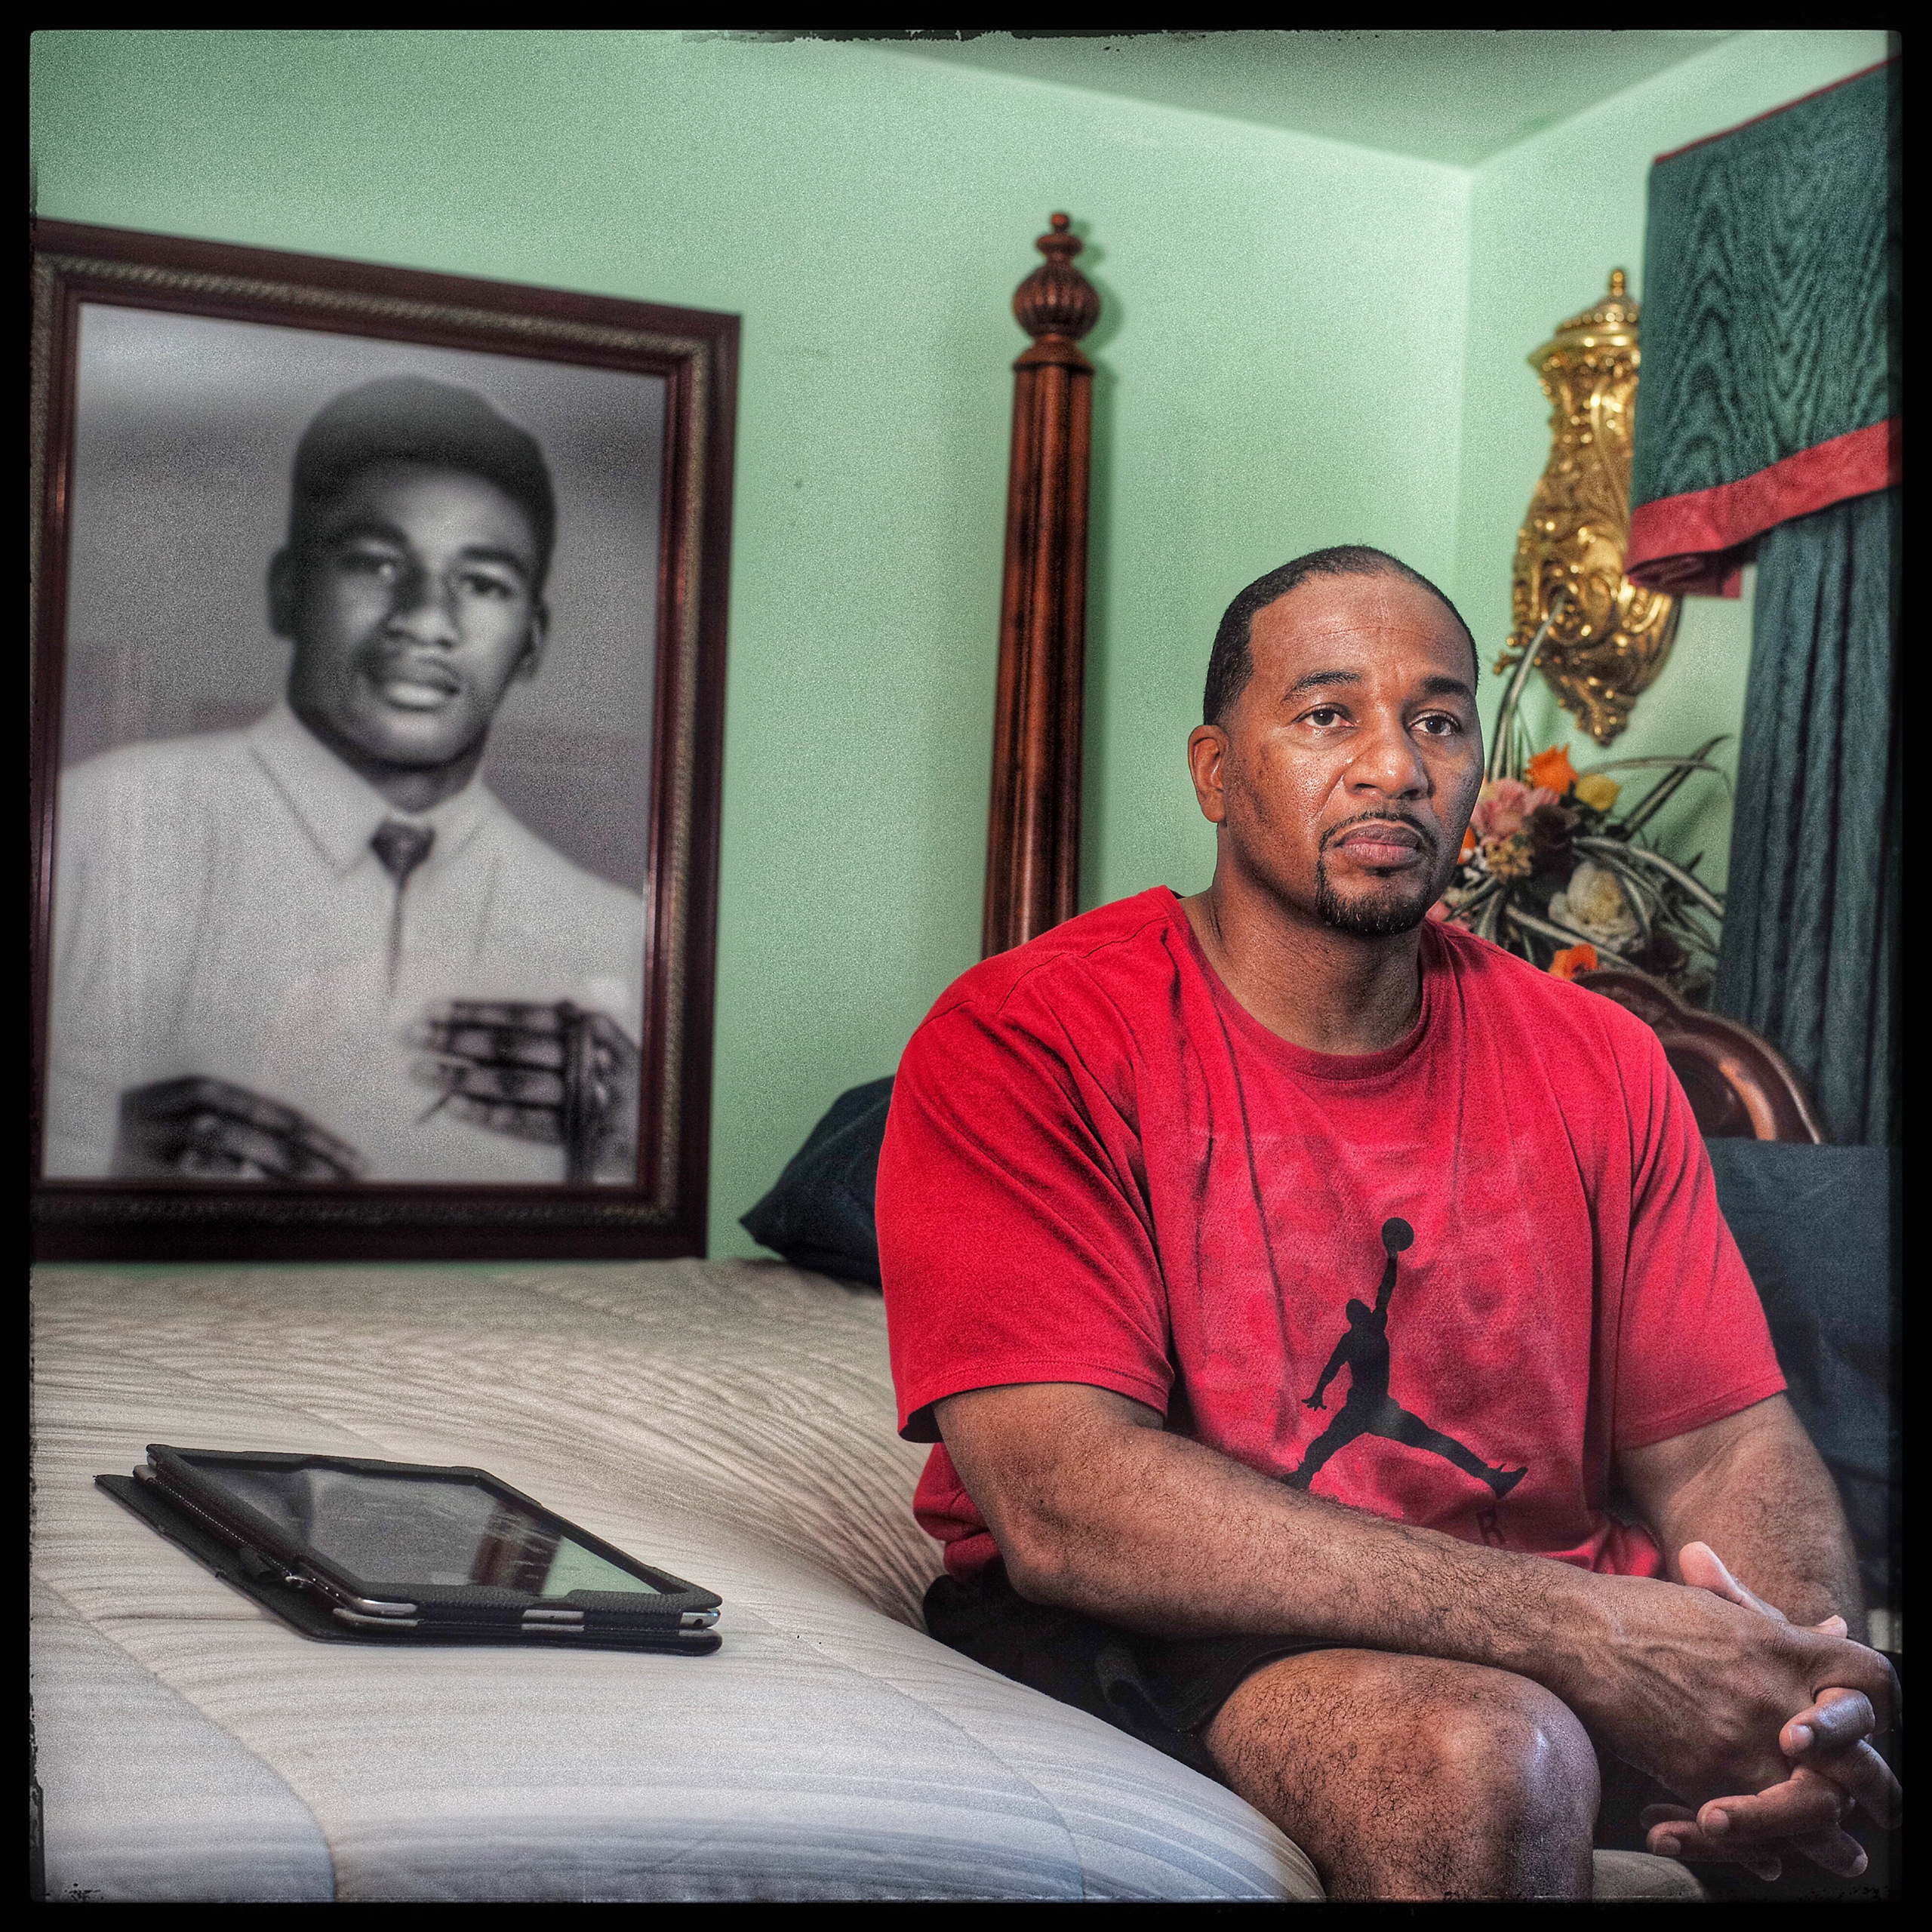 Aaron, seen here at his mother’s home in Mobile, Ala., was released from prison in 2014 after 22 years. His life, he says, is still in a state of transition (Radcliffe Roye for Time)